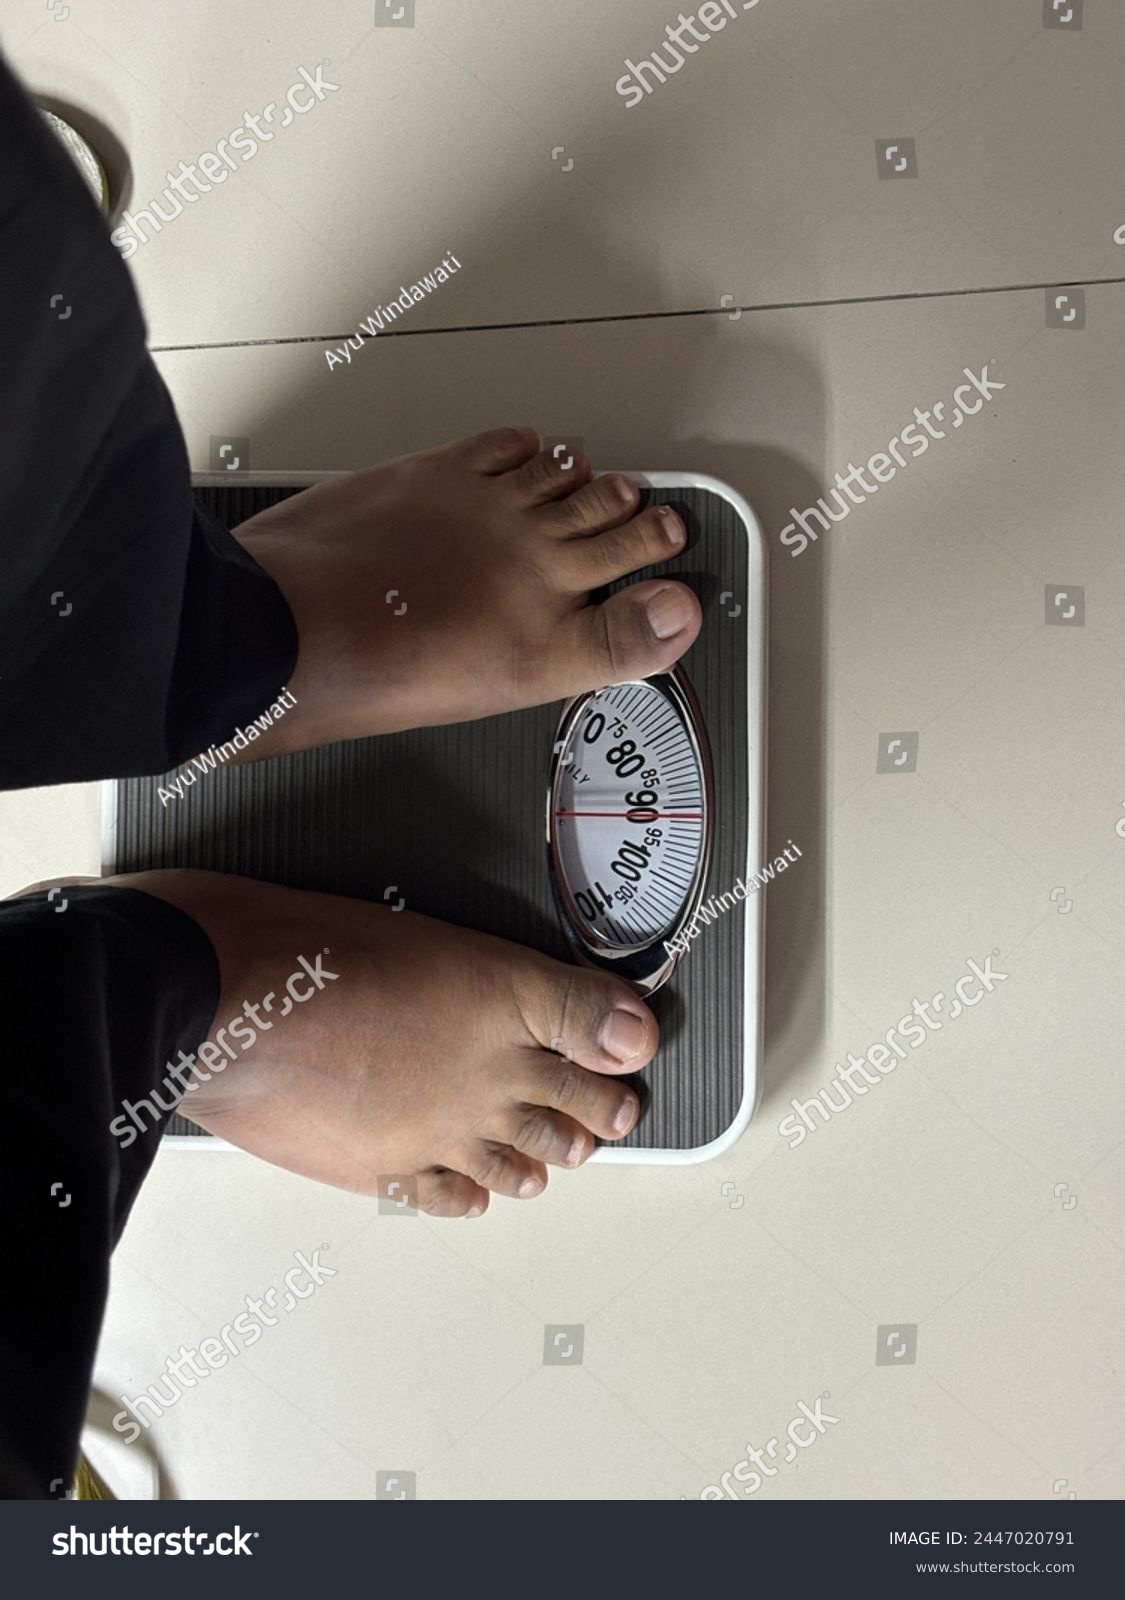 An obese person weighing 90kg #2447020791